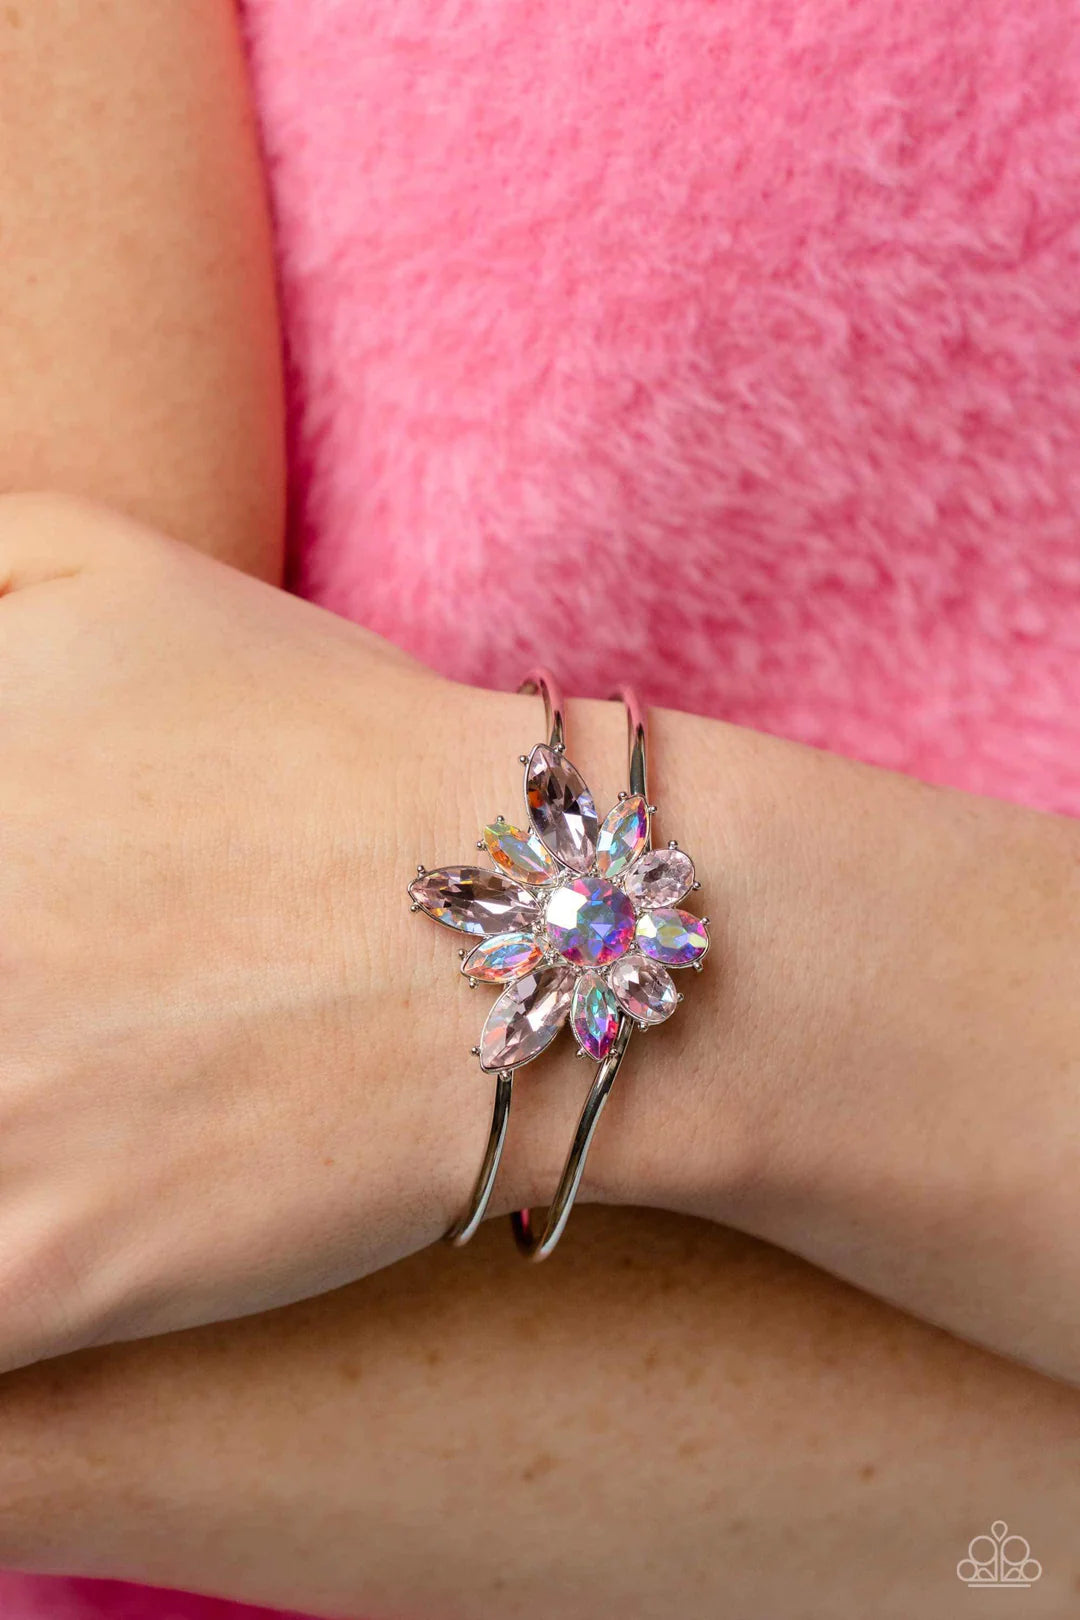 Paparazzi Accessories Chic Corsage - Pink Varying sizes of oval and marquise-cut gems in shades of light pink and shimmery iridescent bloom around a round-brilliant cut center in a similar iridescent hue. The dazzling collection of sparkly petals coalesce